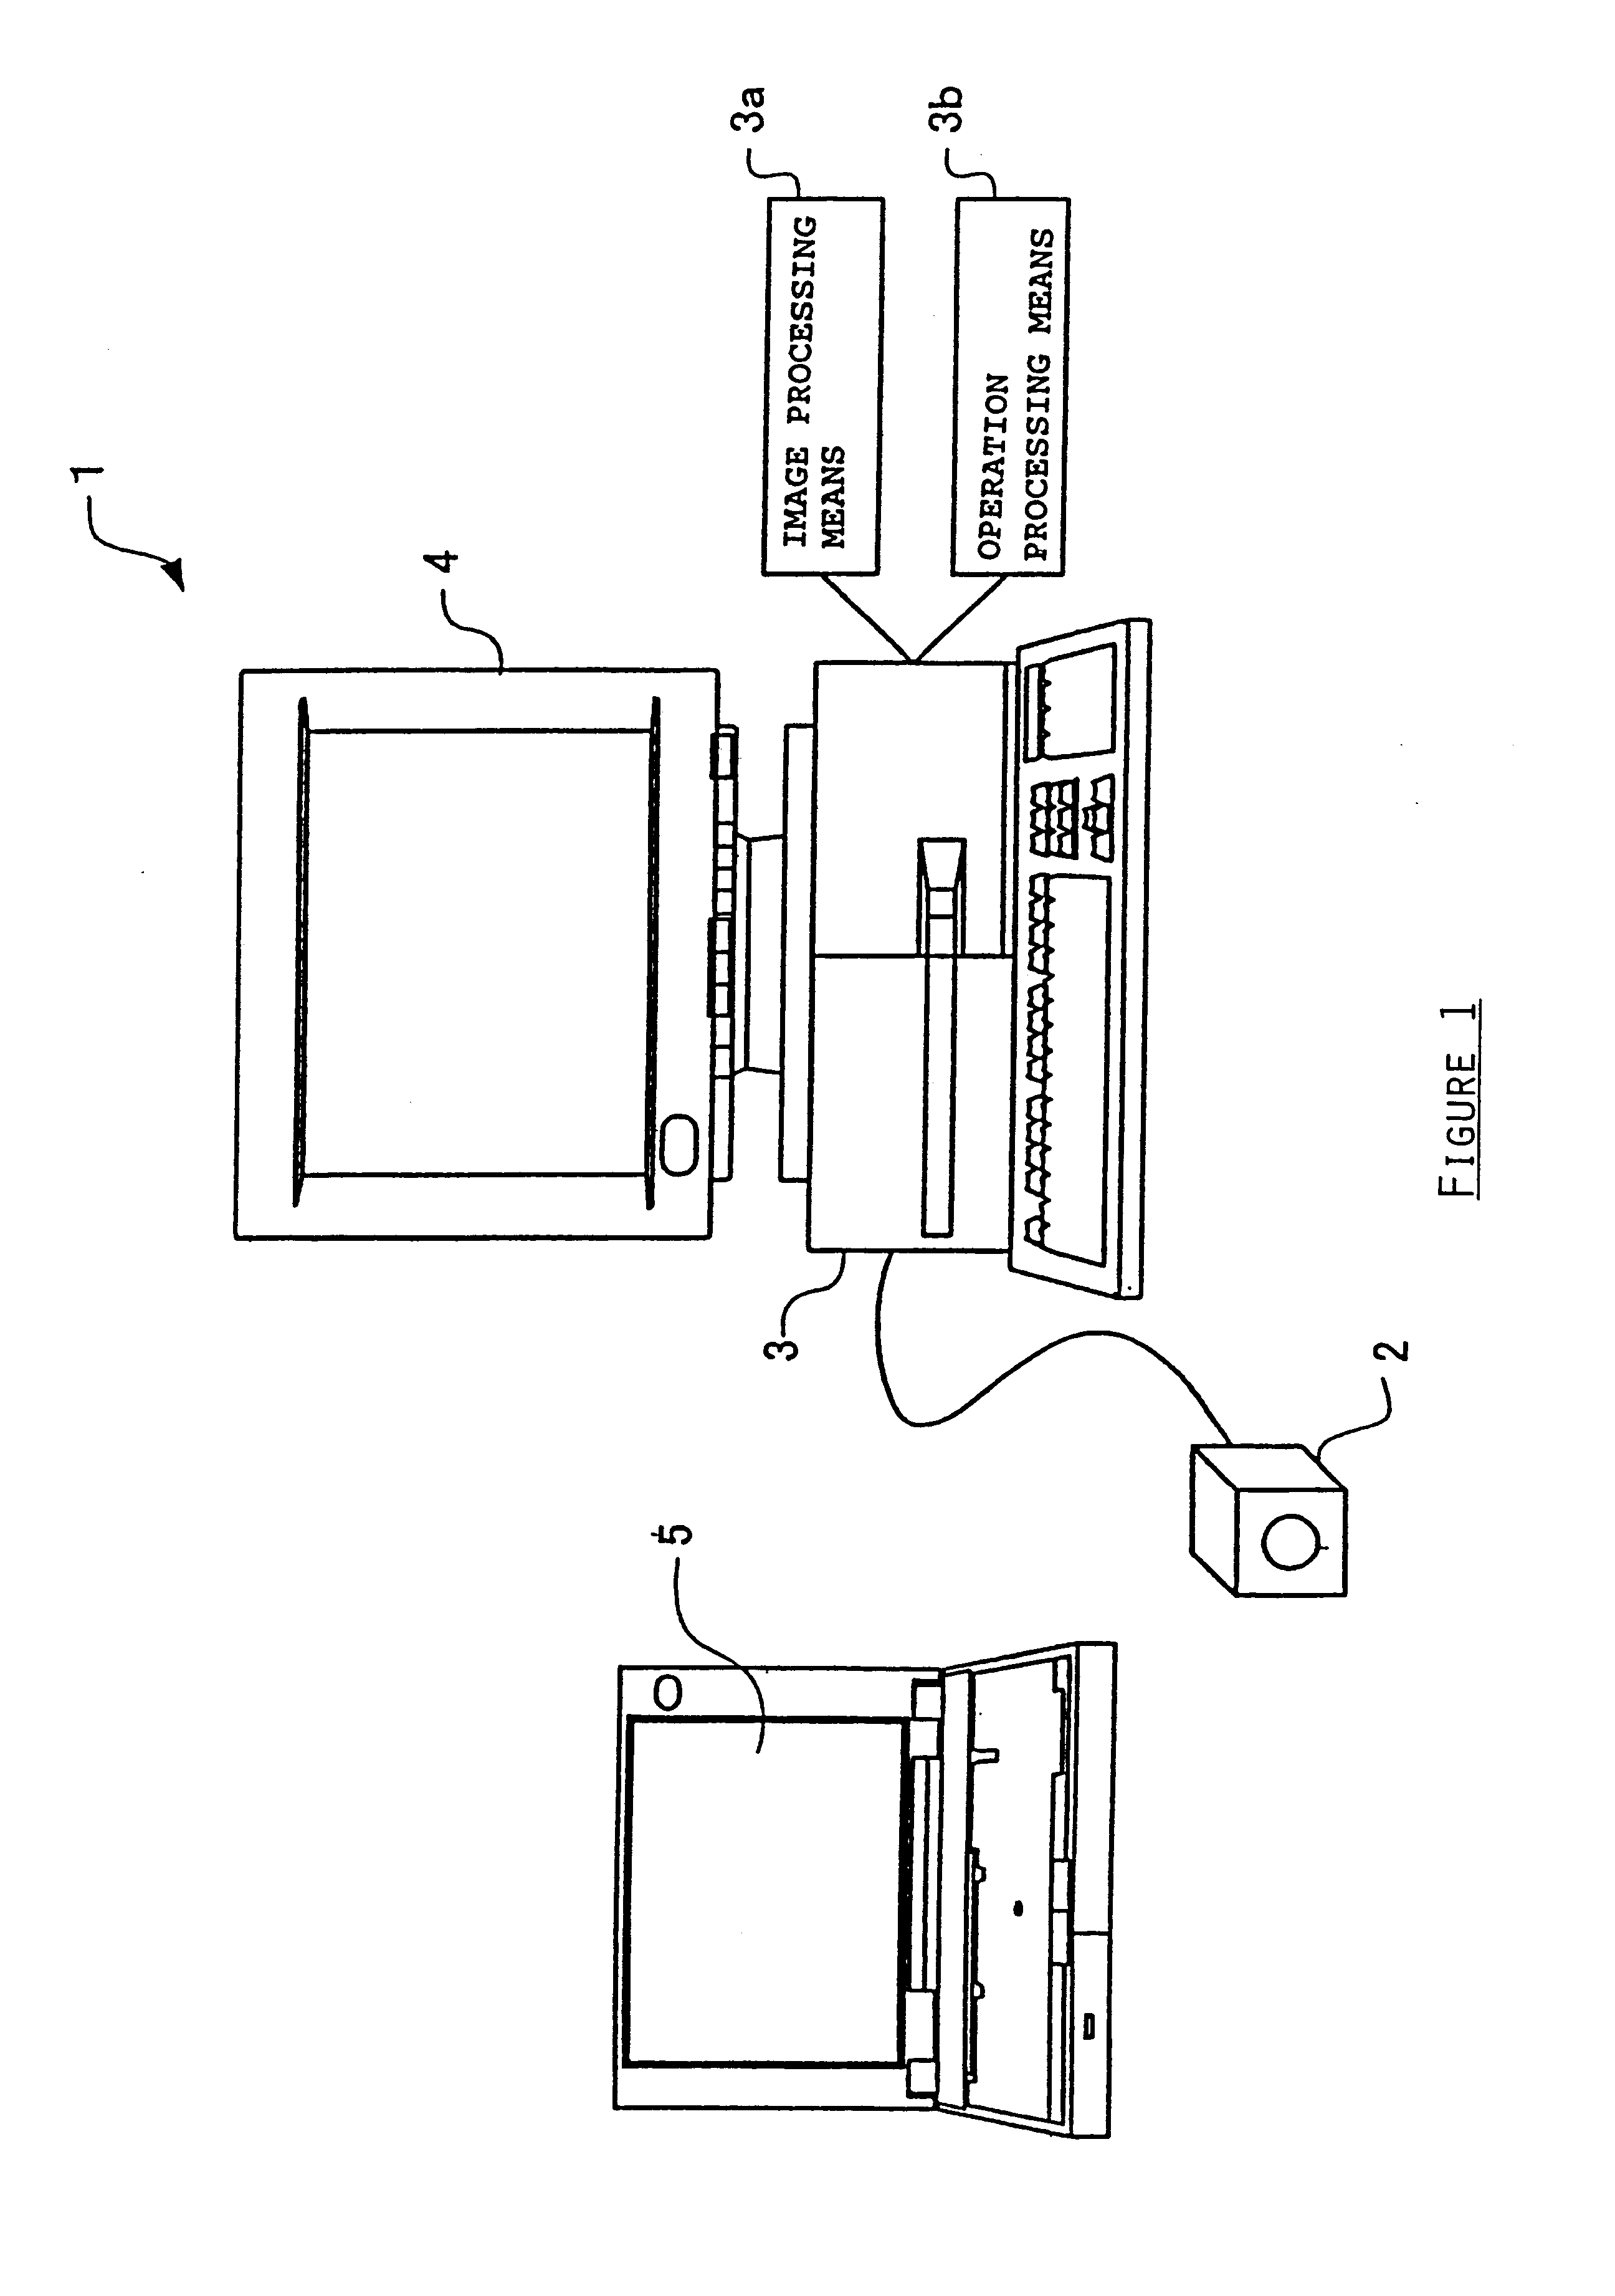 Method and apparatus for acquiring luminance information and for evaluating the quality of a display device image